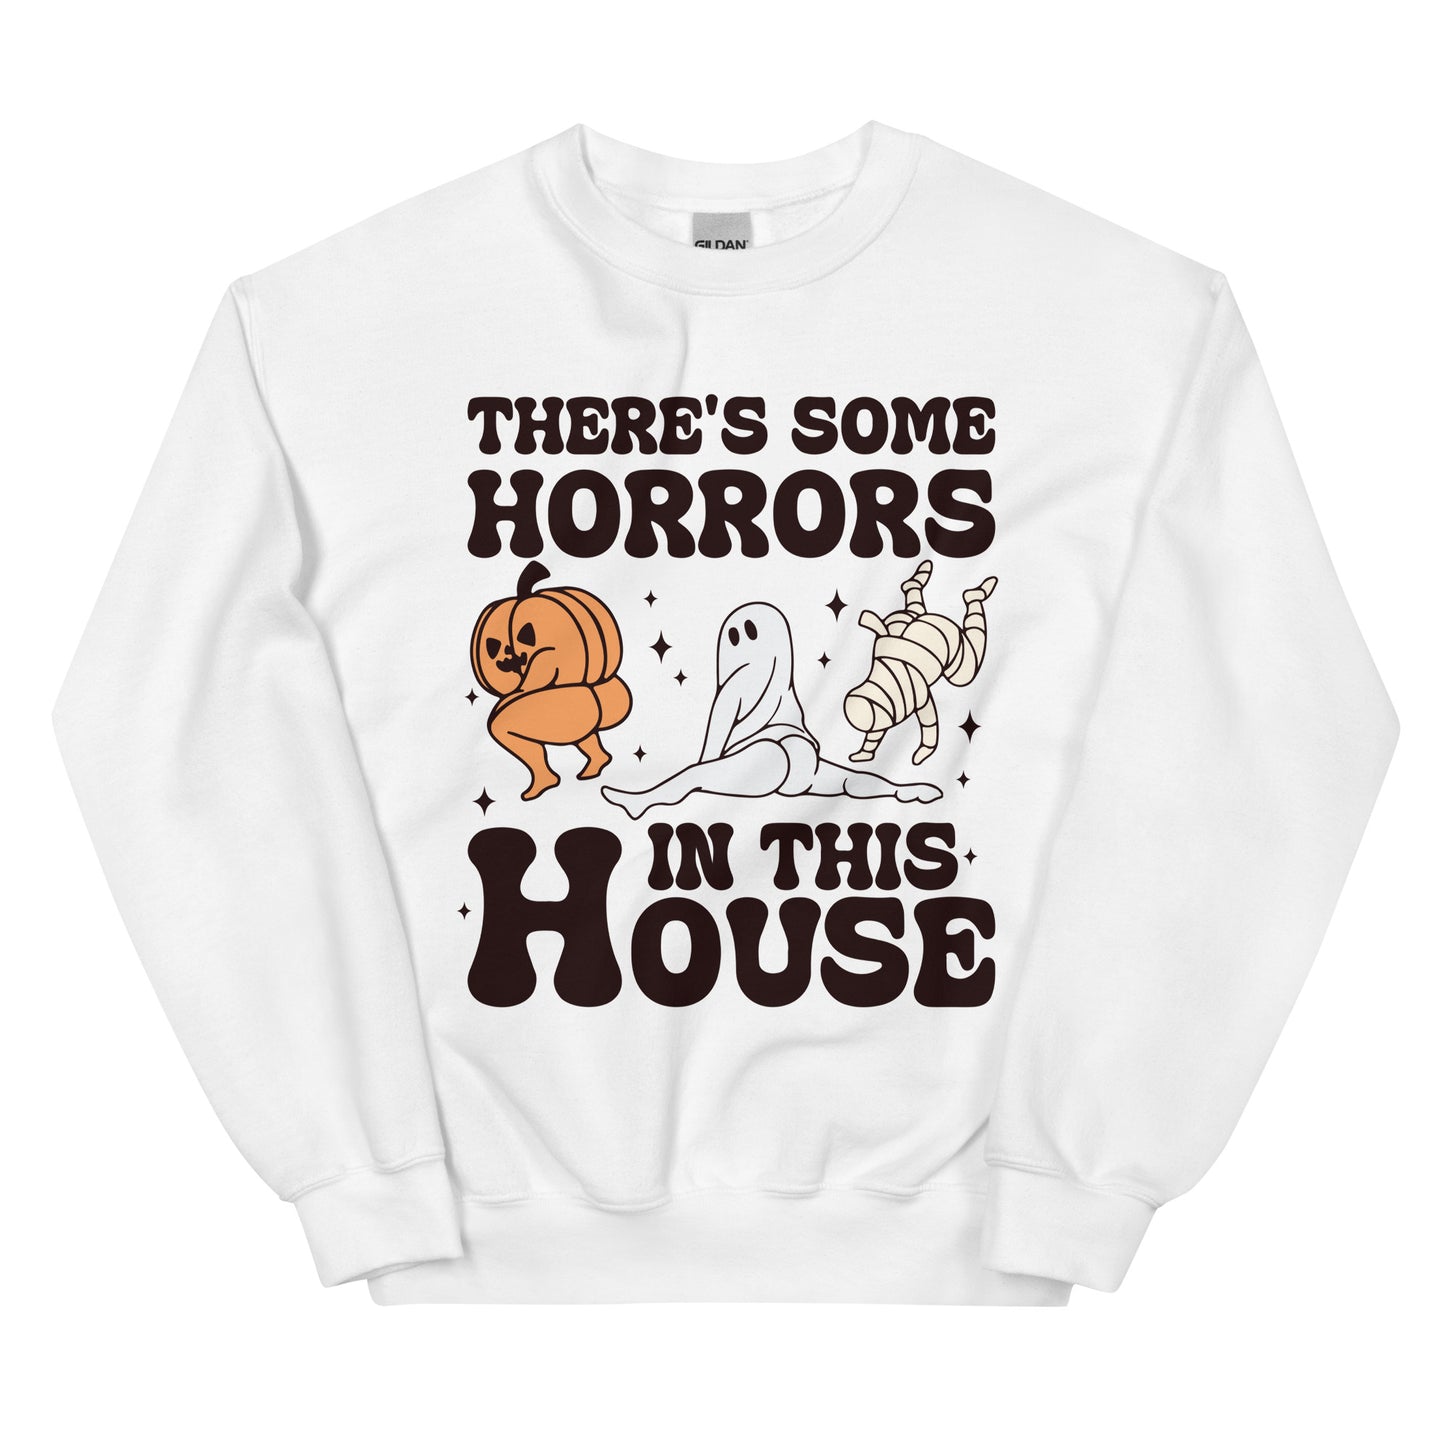 There's some horrors in the house Sweatshirt